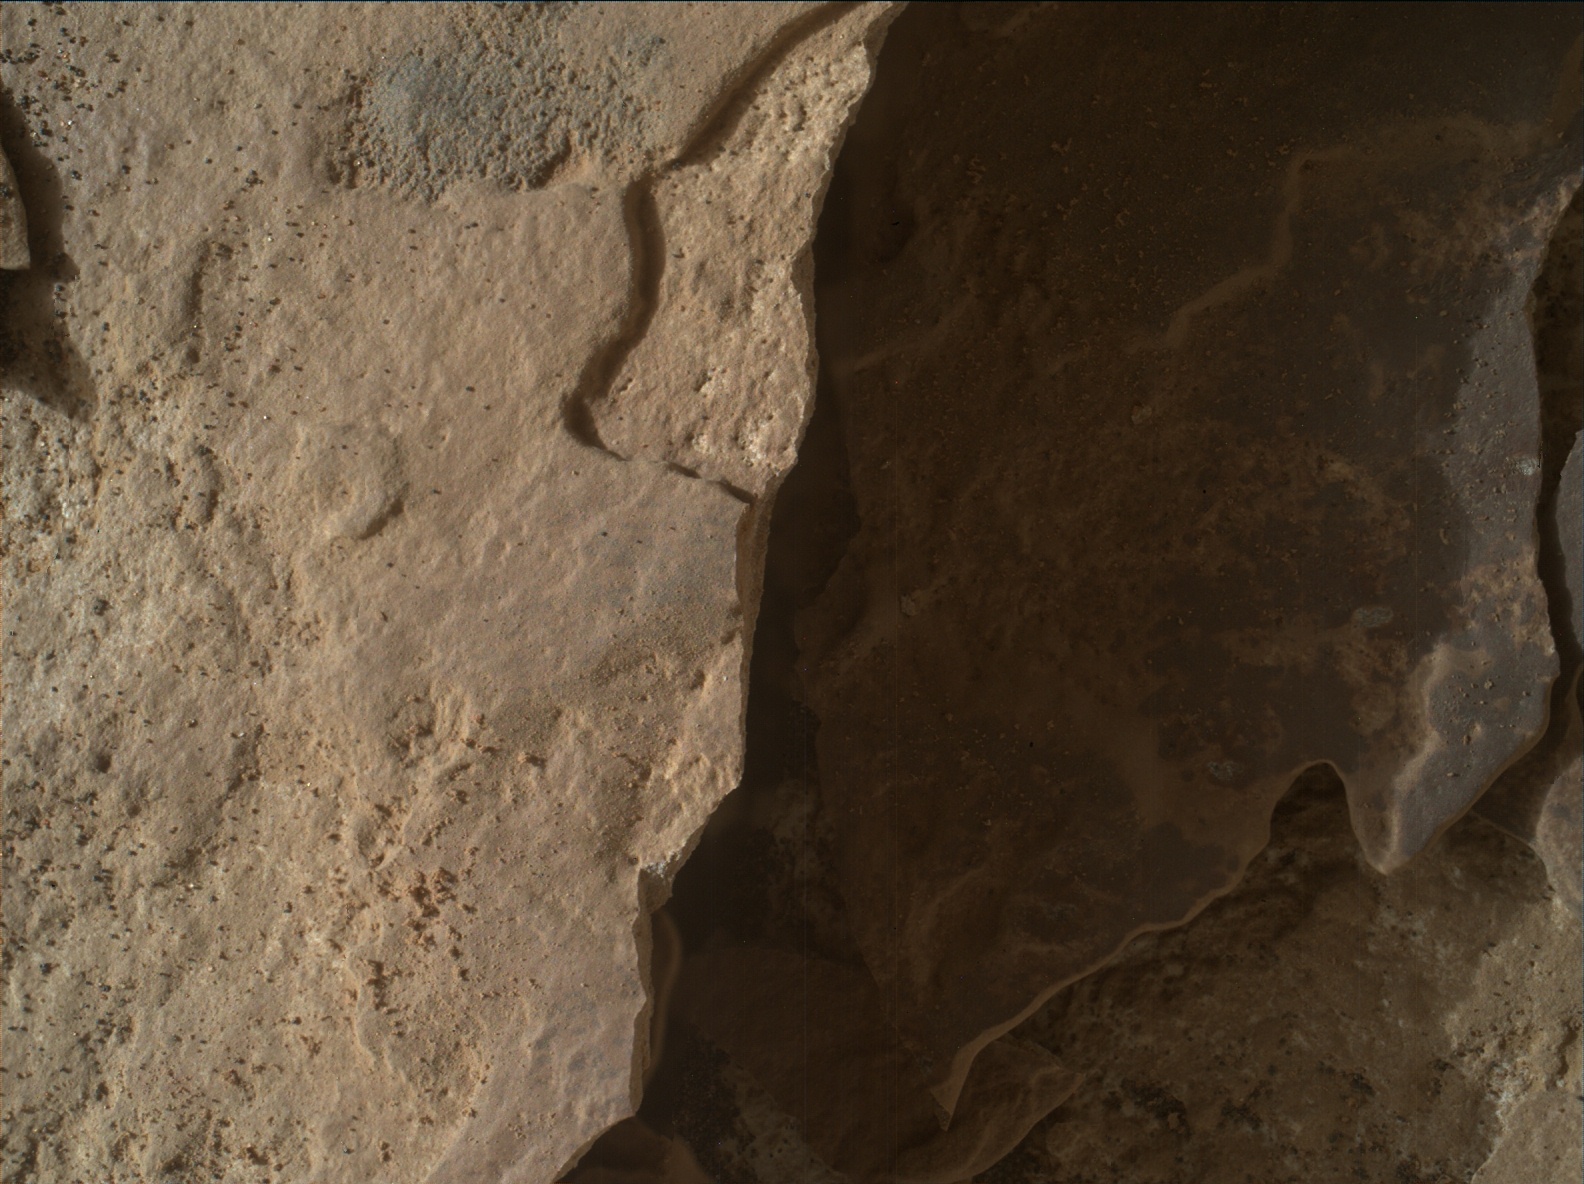 Nasa's Mars rover Curiosity acquired this image using its Mars Hand Lens Imager (MAHLI) on Sol 1702